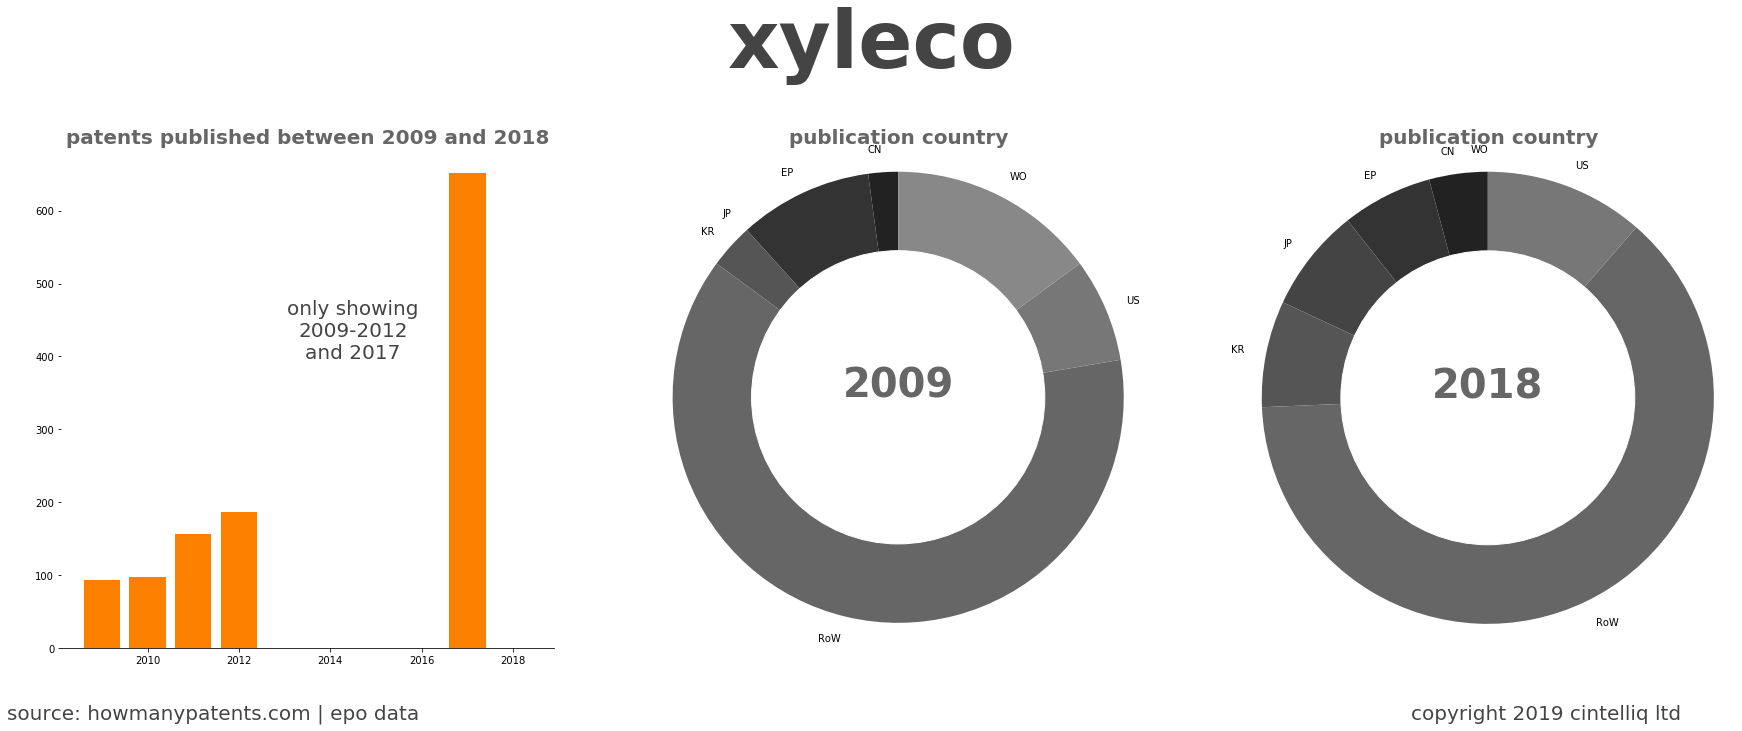 summary of patents for Xyleco